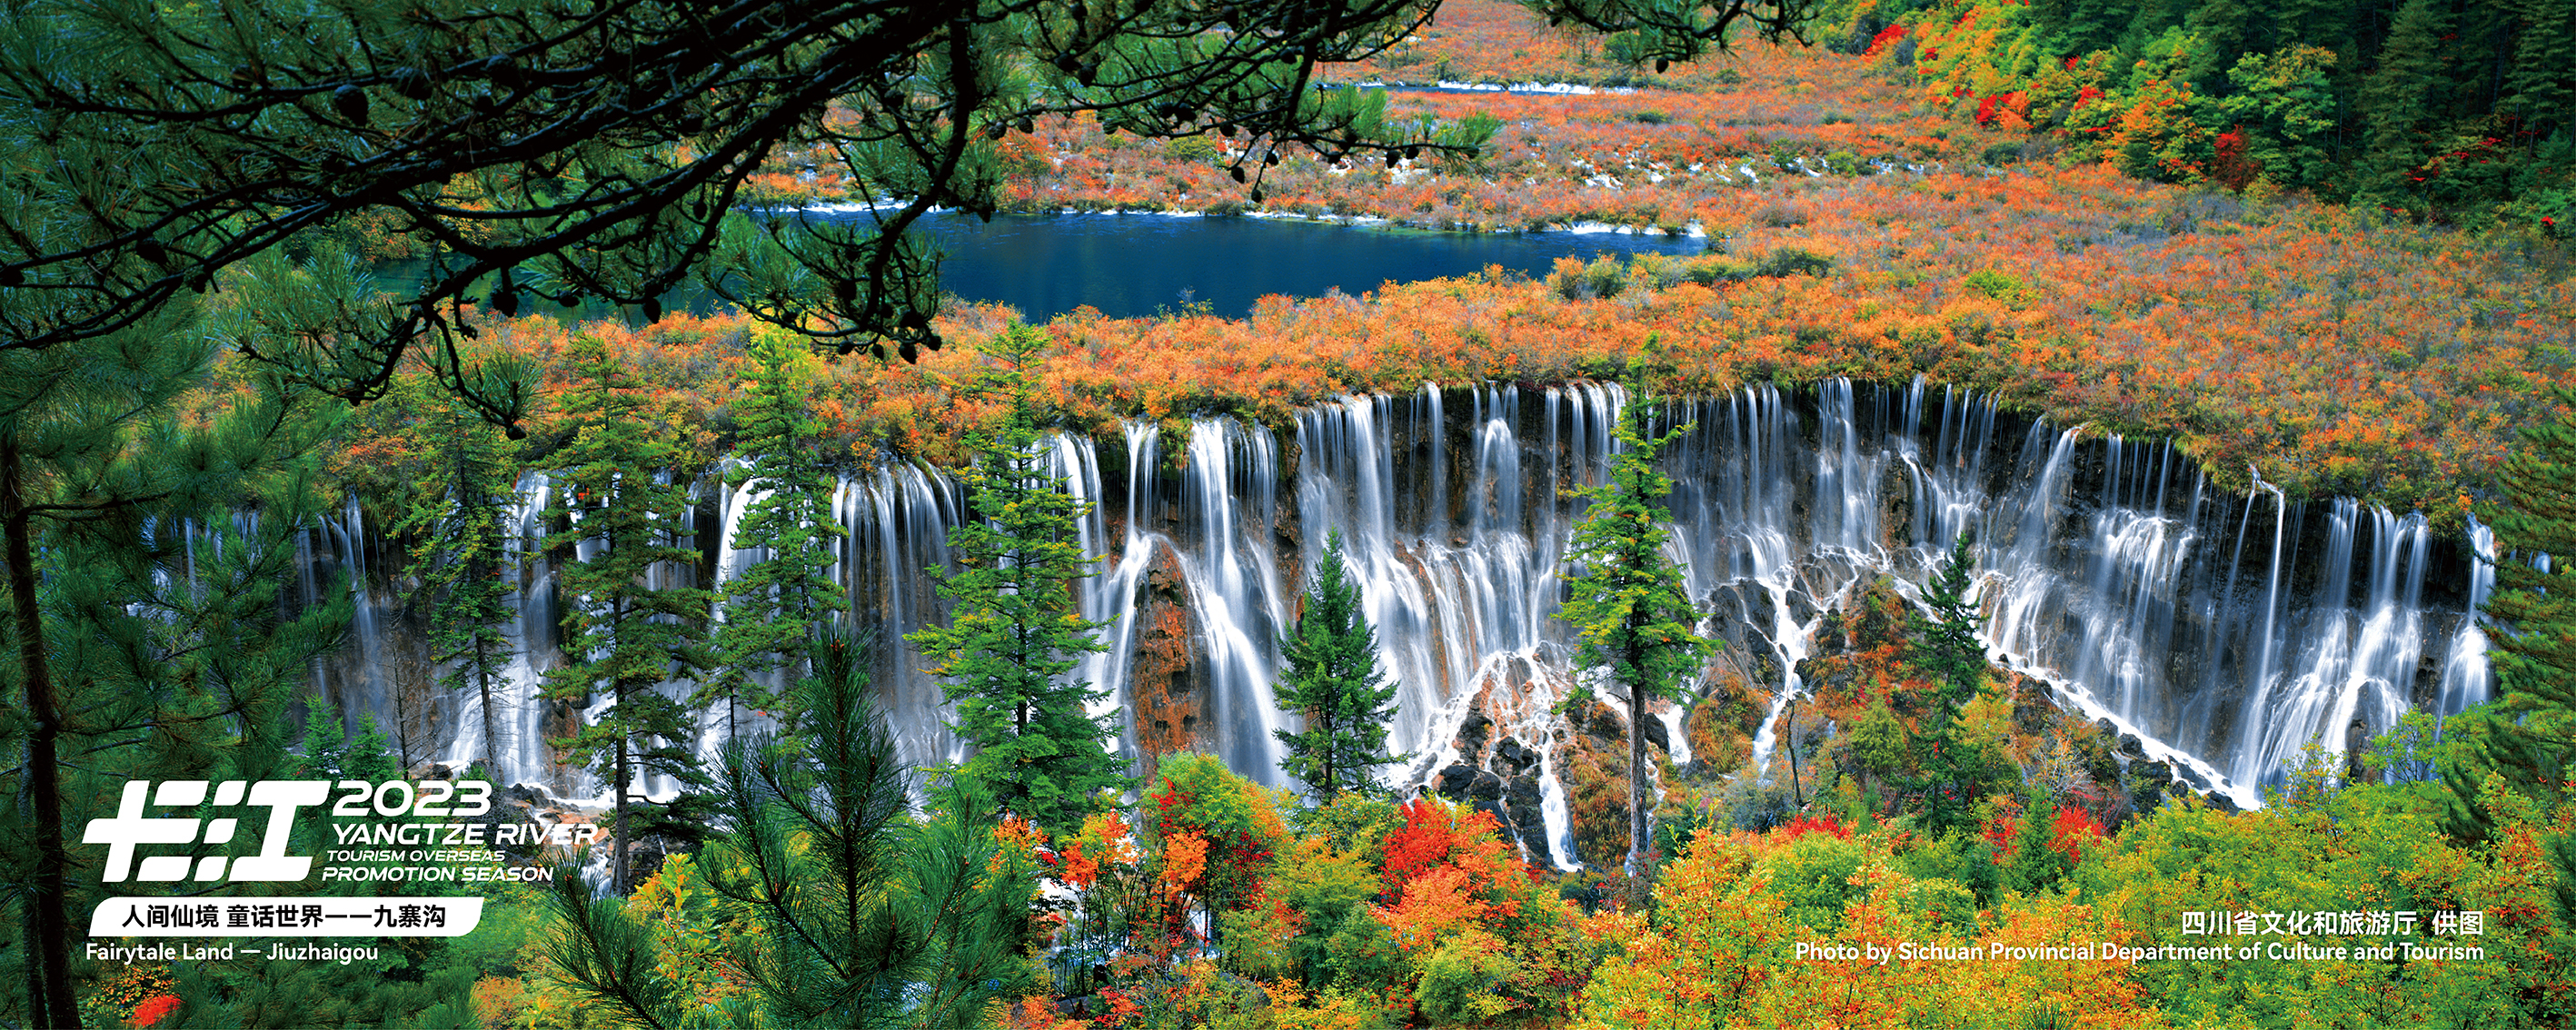 The Jiuzhaigou Valley Scenic and Historic Interest Area in Sichuan, China /Photo provided to CGTN